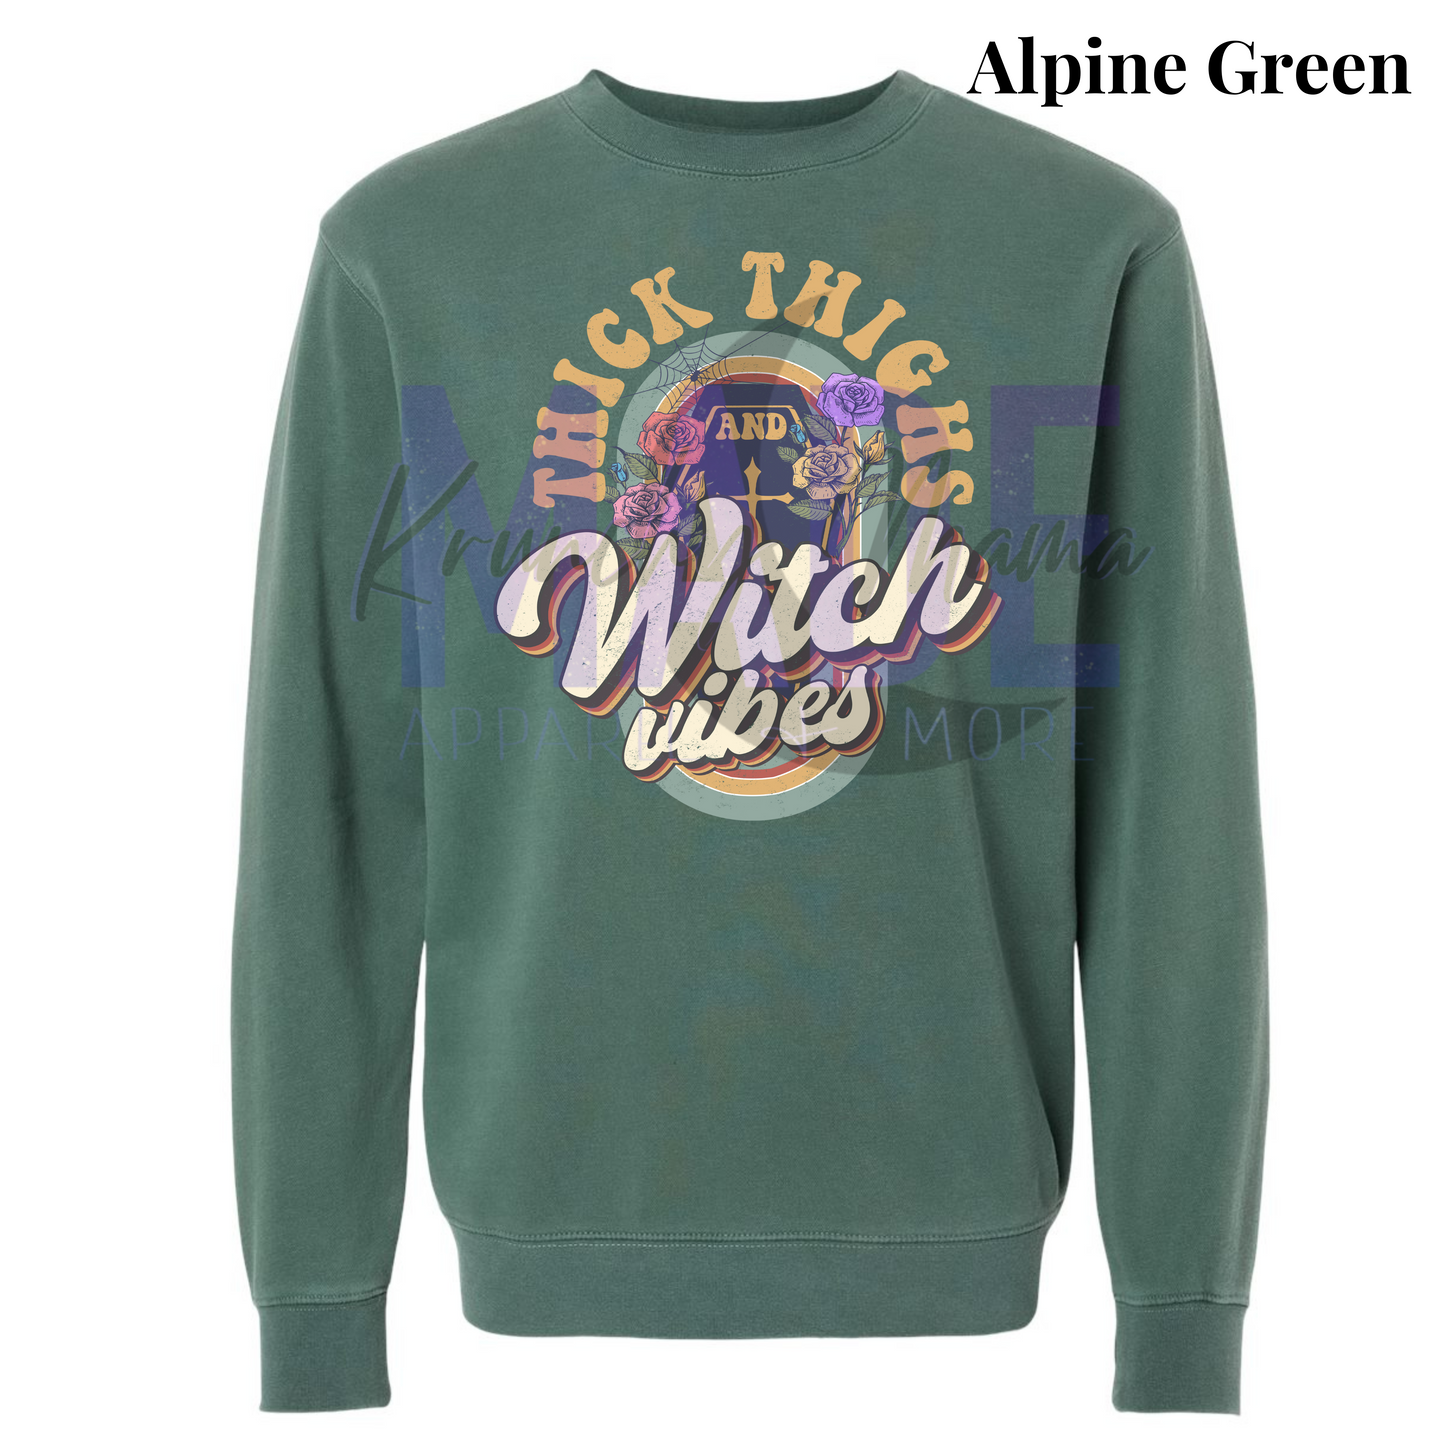 Thick Thighs & Witch Vibes Retro Crewneck